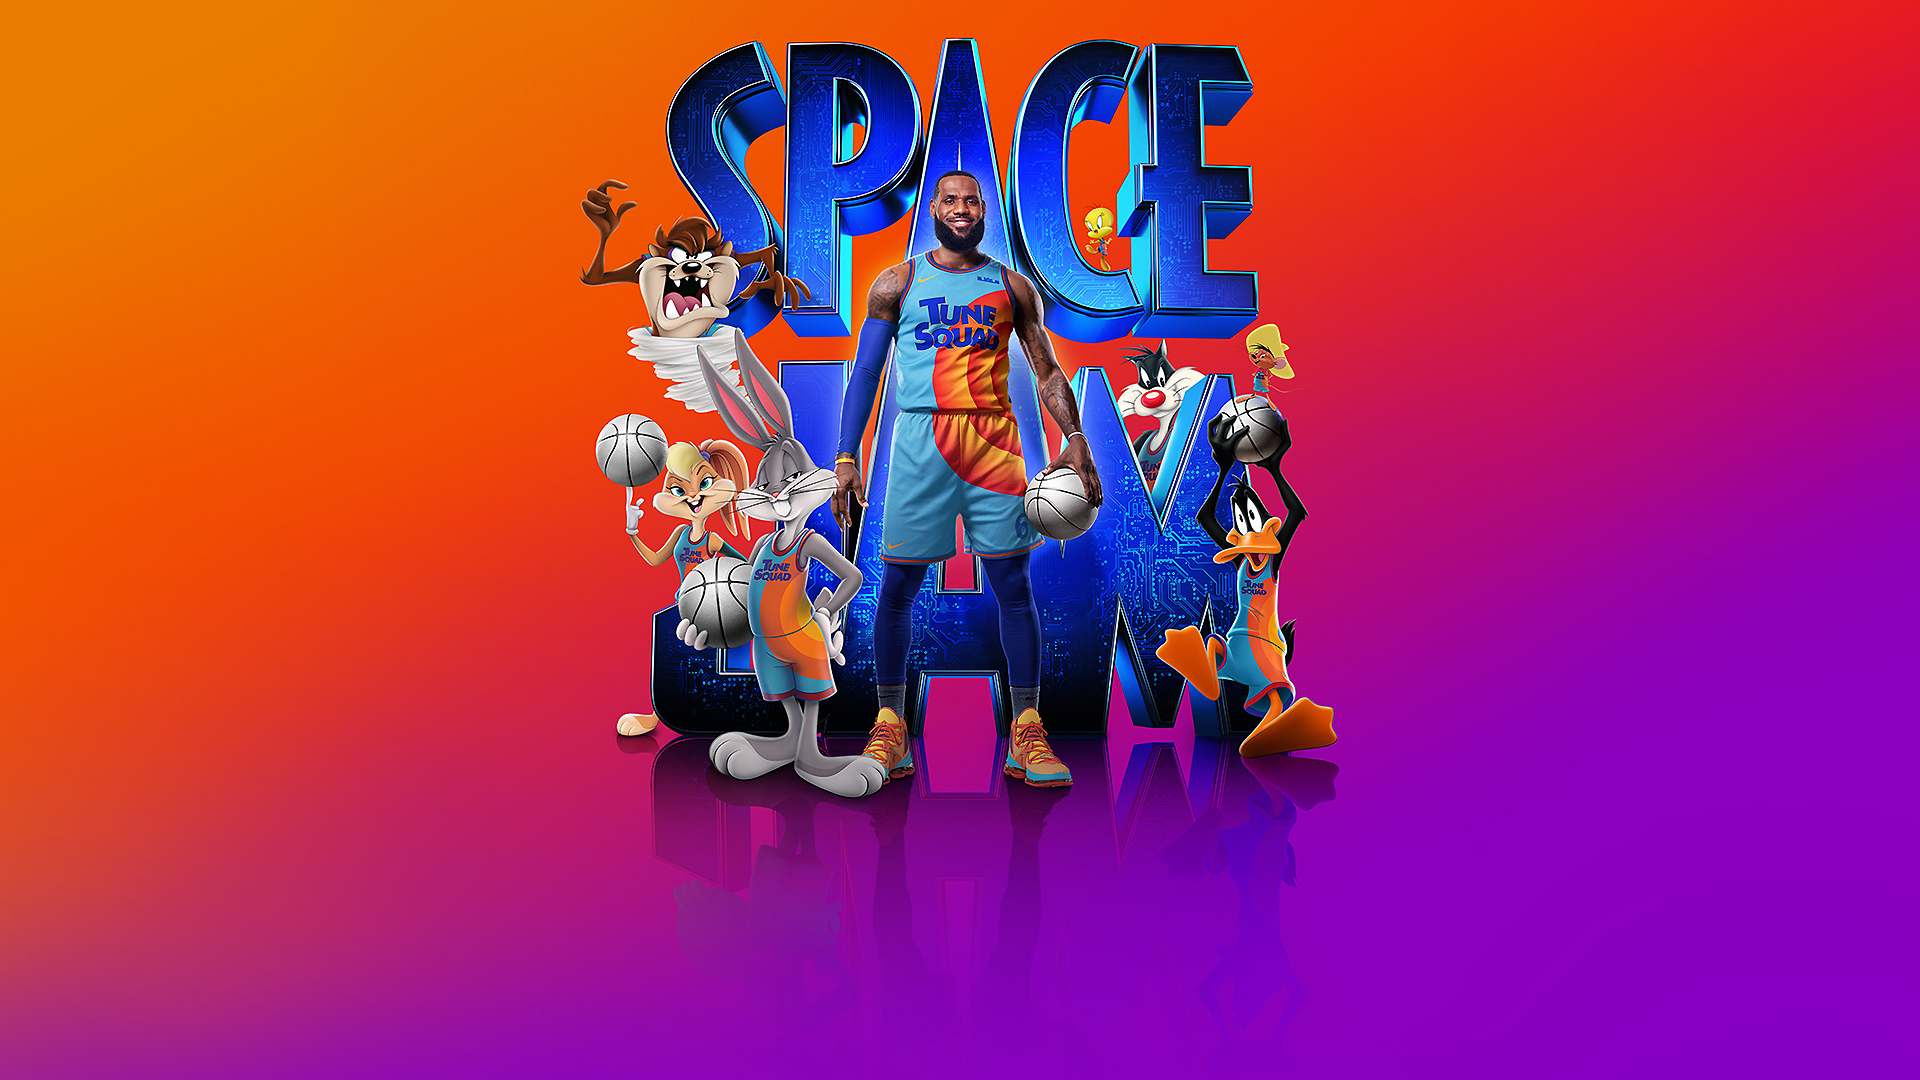 Space Jam 2 release date, cast, soundtrack & more to know for LeBron Ja...